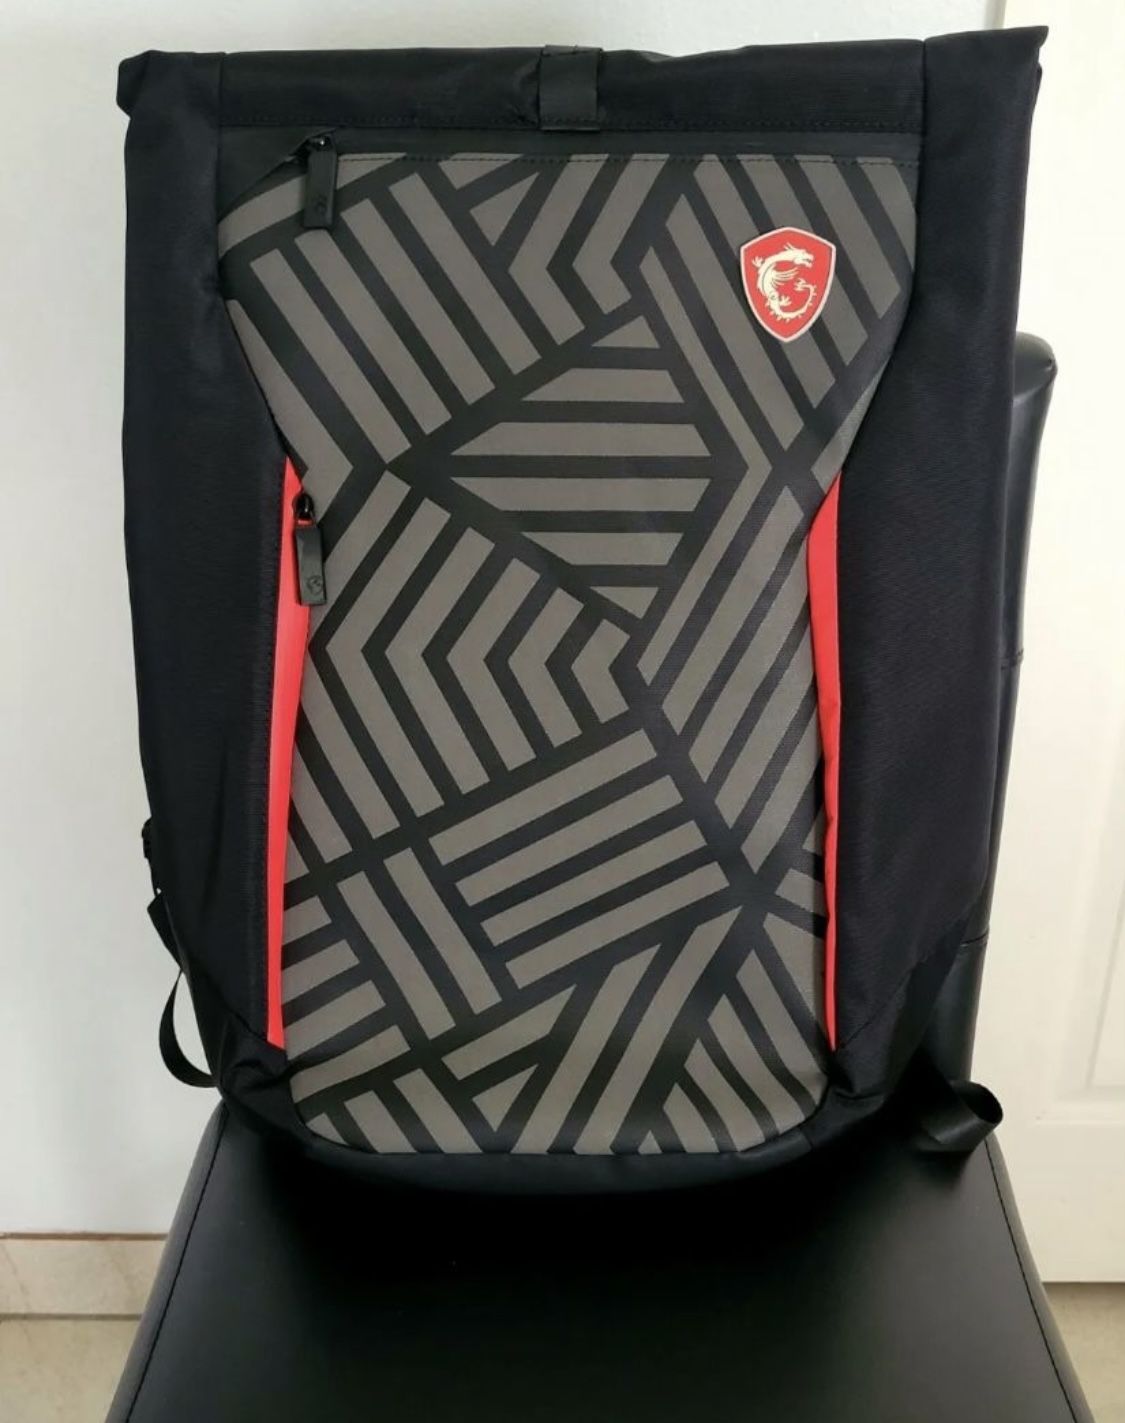 “NEW” MSI Mystic Knight Gaming Laptop Backpack